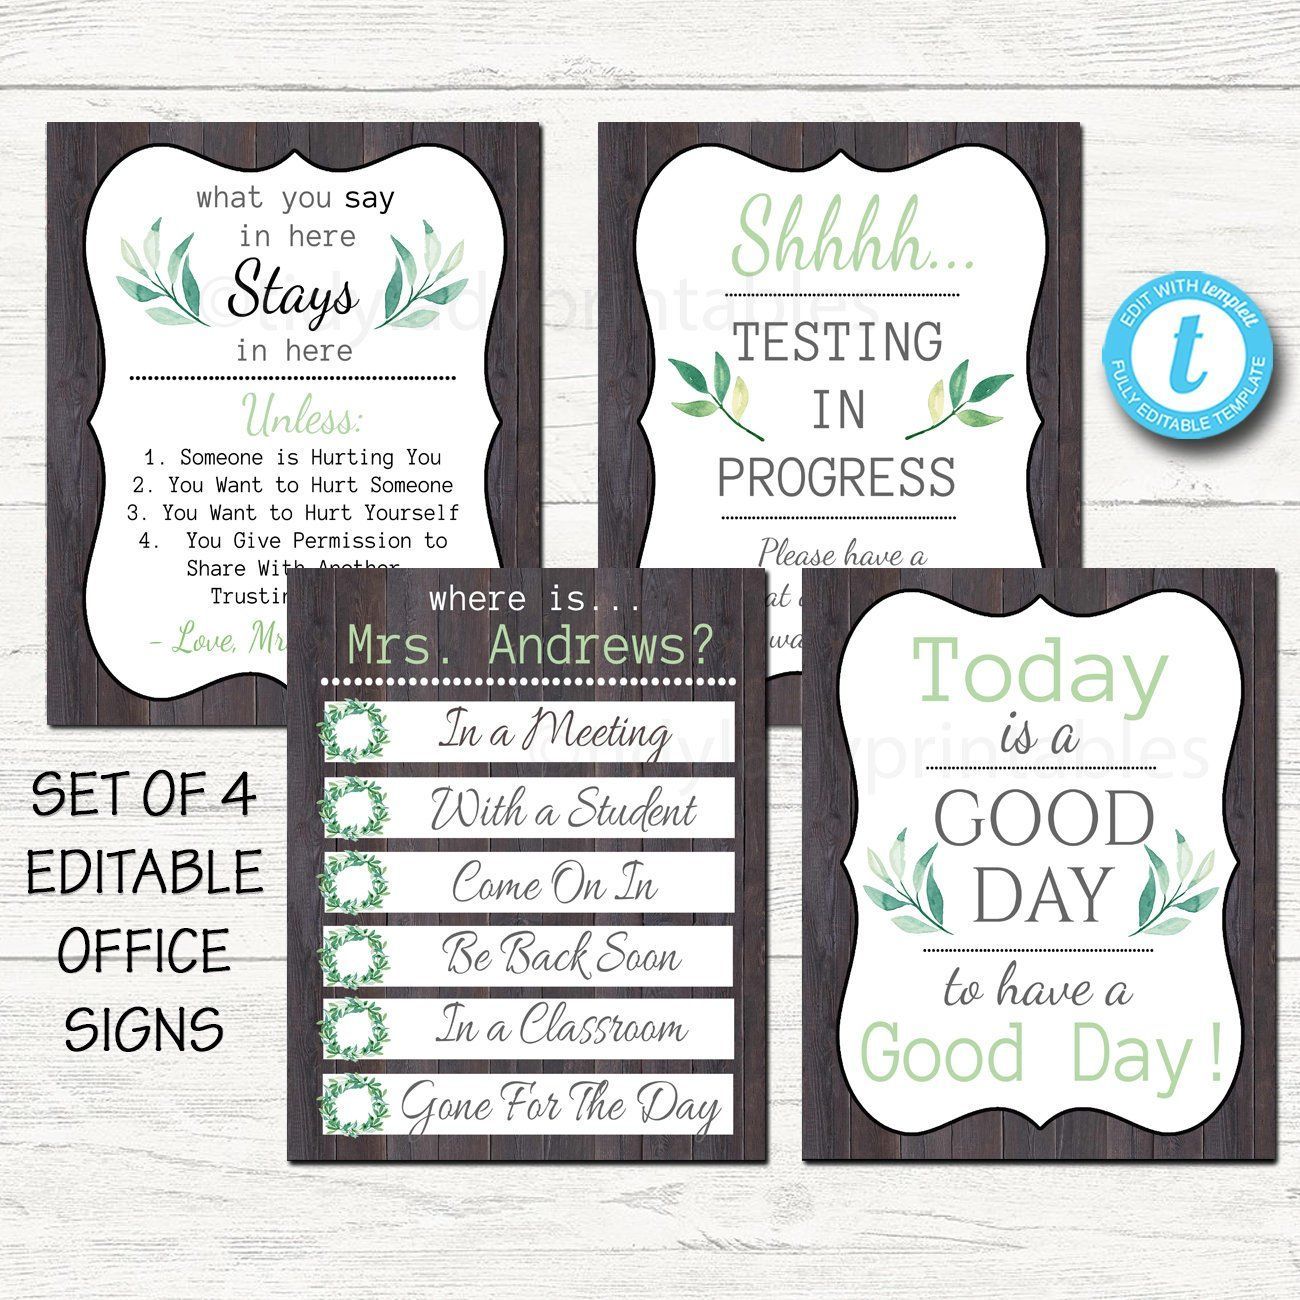 TEMPLATES Farmhouse Themed Counseling Office Decor, Confidentiality Poster, Therapist Where is the Door Sign, What You Say in Here - TEMPLATES Farmhouse Themed Counseling Office Decor, Confidentiality Poster, Therapist Where is the Door Sign, What You Say in Here -   17 fitness Office decor ideas